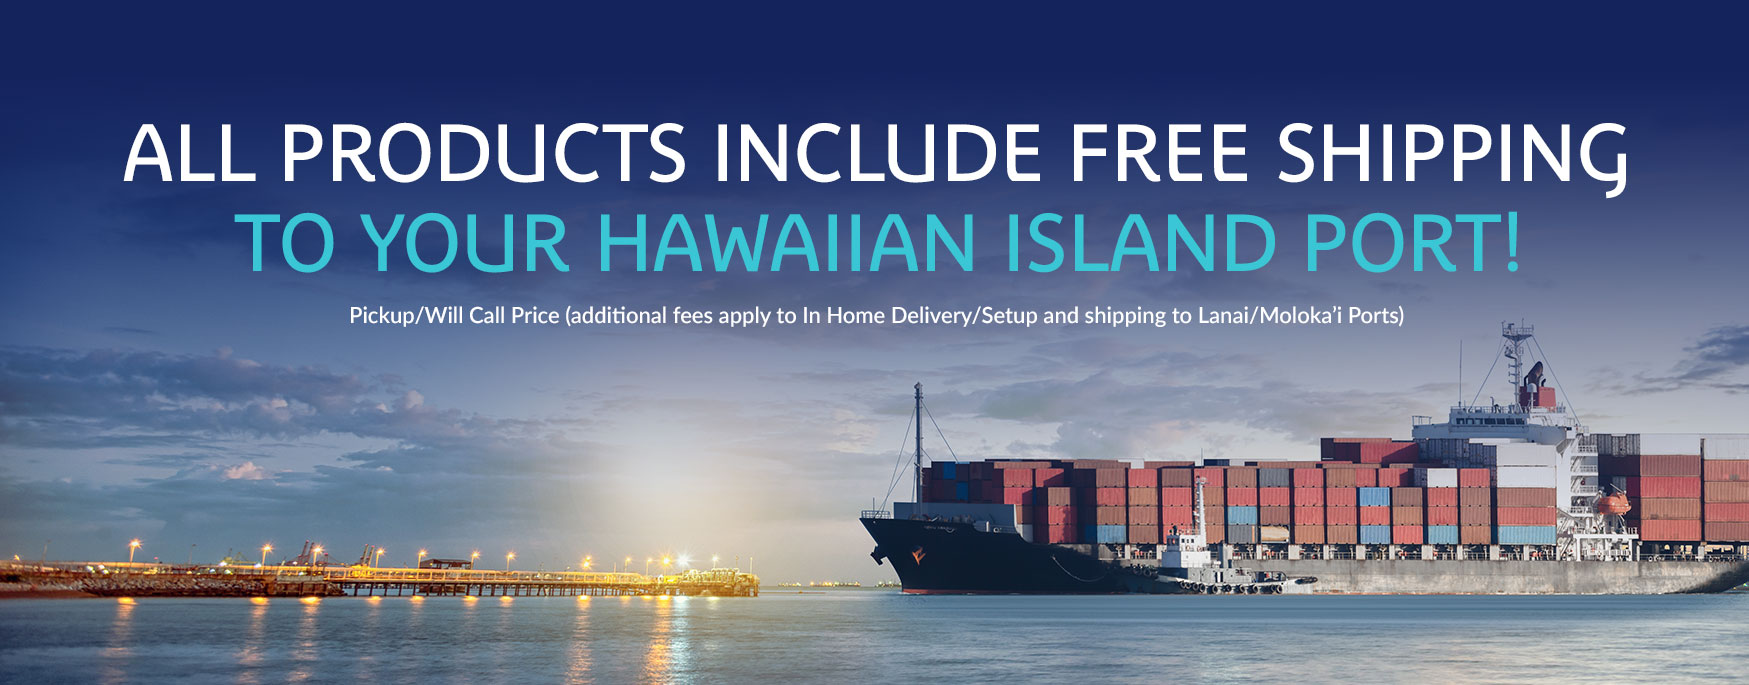 Hawaii S Online Furniture Store With Free Shipping To All The